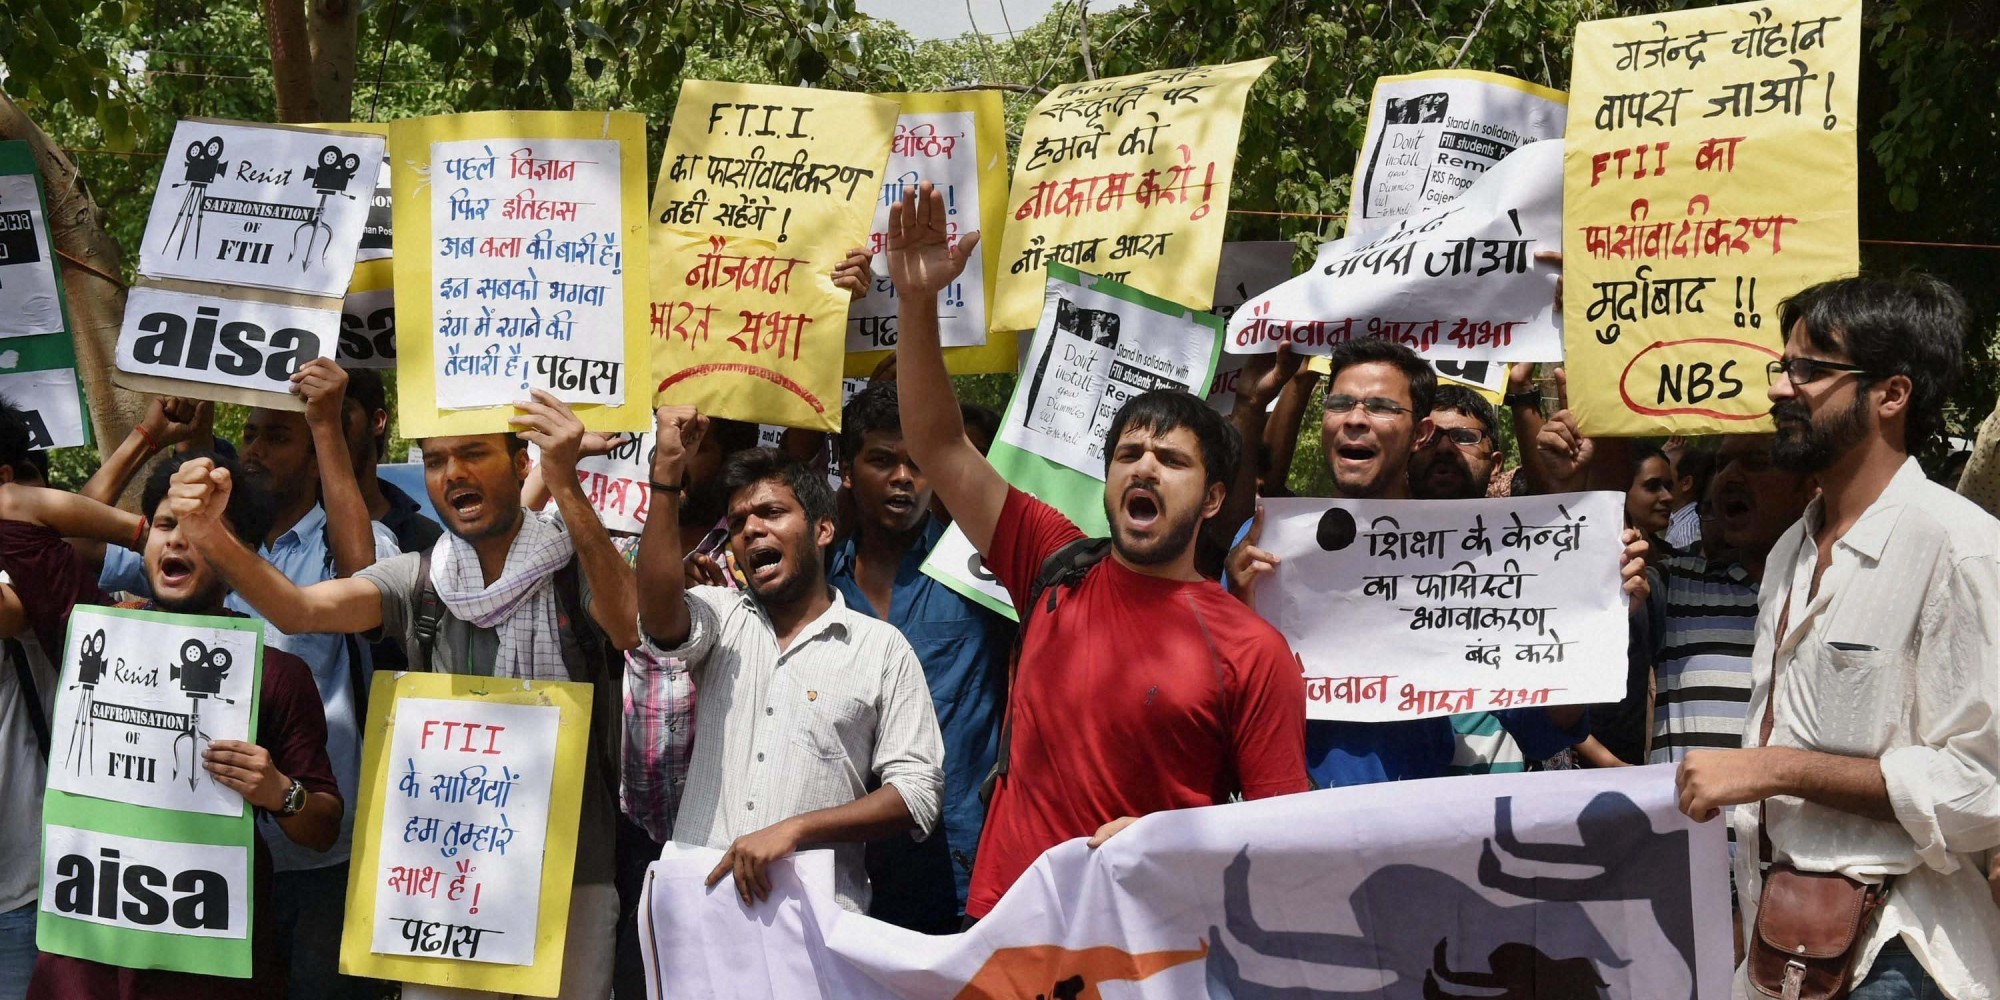 New Delhi: Students protest against the appointment of Gajendra Chauhan as the chairman of the FTII governing council, in New Delhi on Friday. PTI Photo by Atul Yadav  (PTI7_3_2015_000068B)